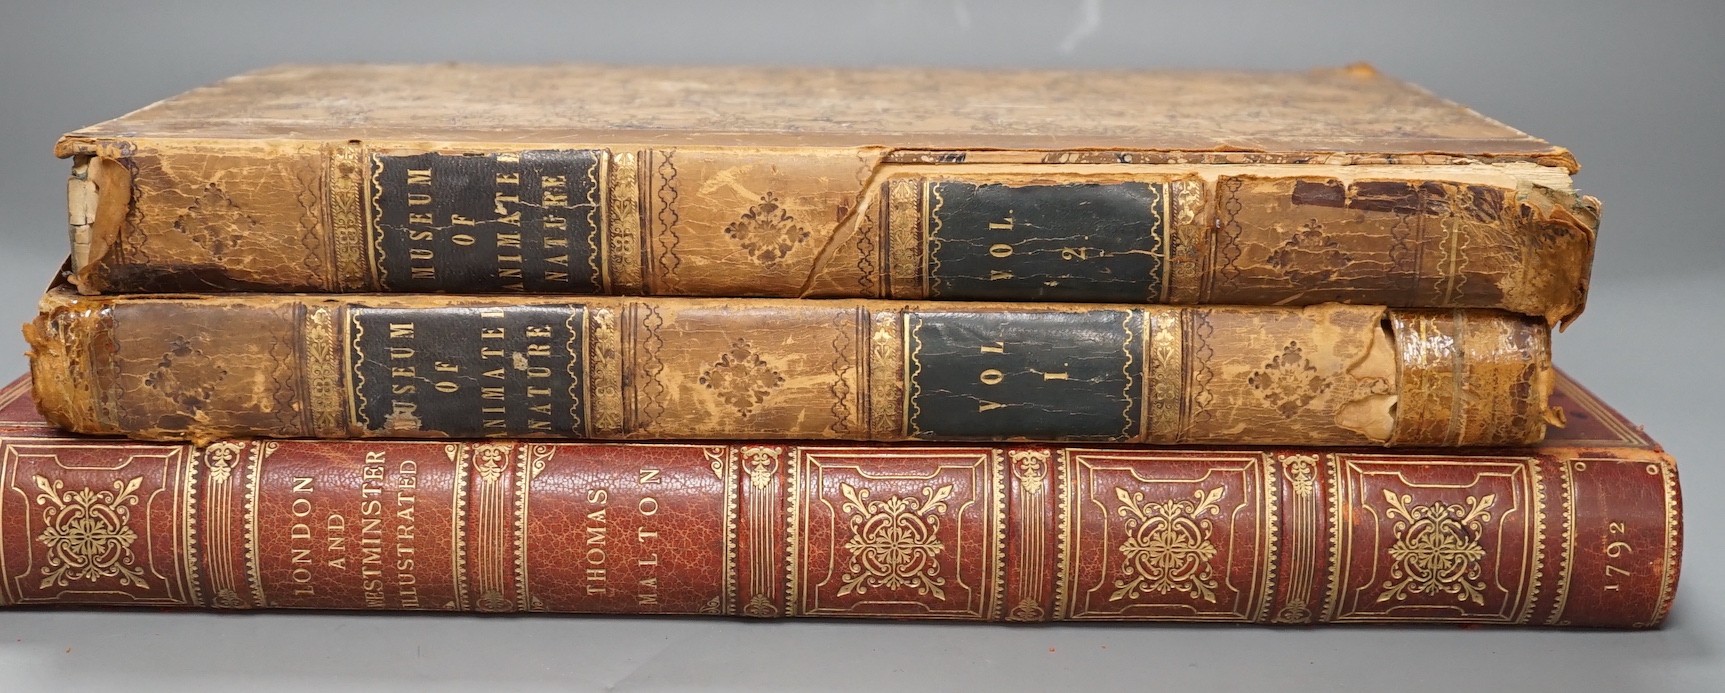 Two volumes of Museum of Animated Nature and a volume of London and Westminster Illustrated